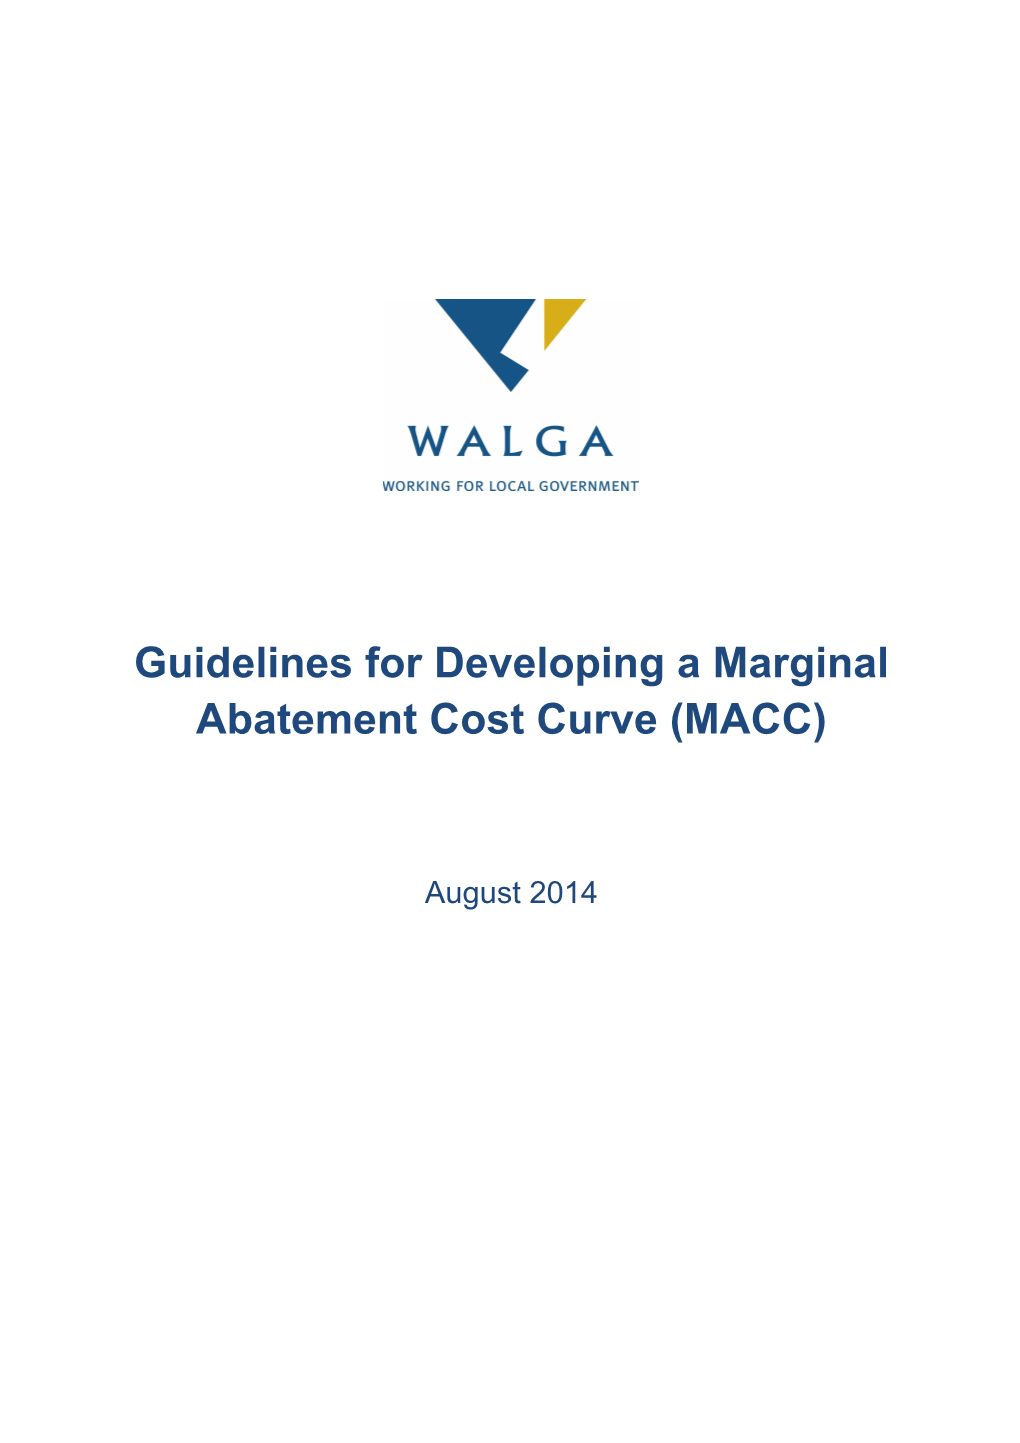 Guidelines for Developing a Marginal Abatement Cost Curve (MACC)